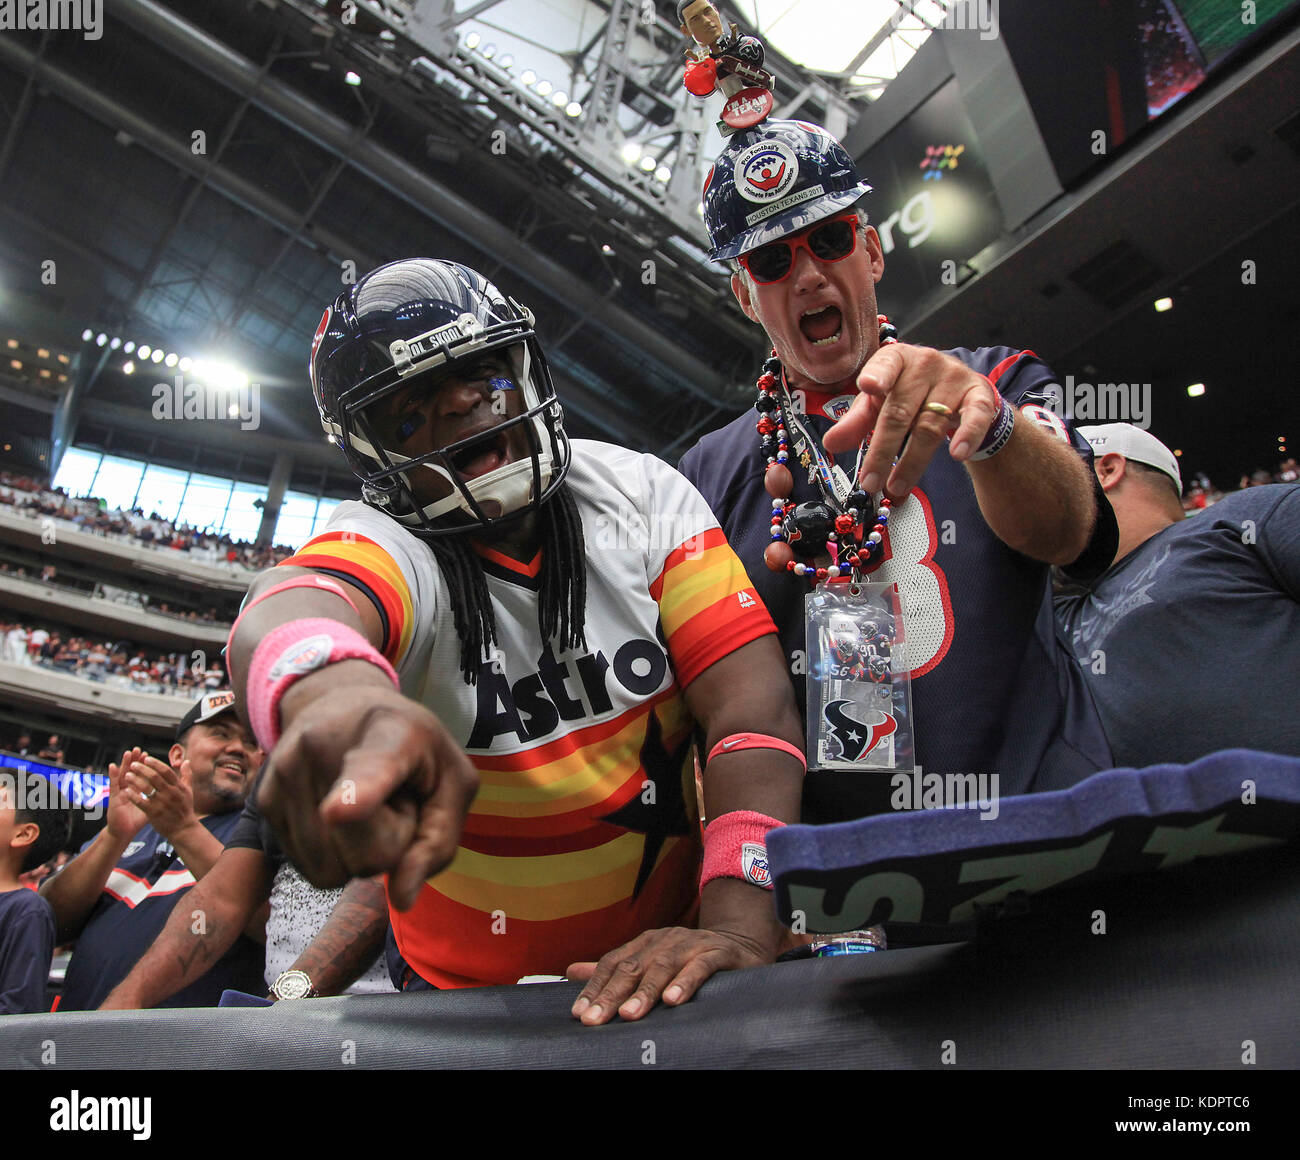 Houston, TX, USA. 15th Oct, 2017. Houston Texans fans during the NFL game between the Cleveland Browns and the Houston Texans at NRG Stadium in Houston, TX. John Glaser/CSM/Alamy Live News Stock Photo